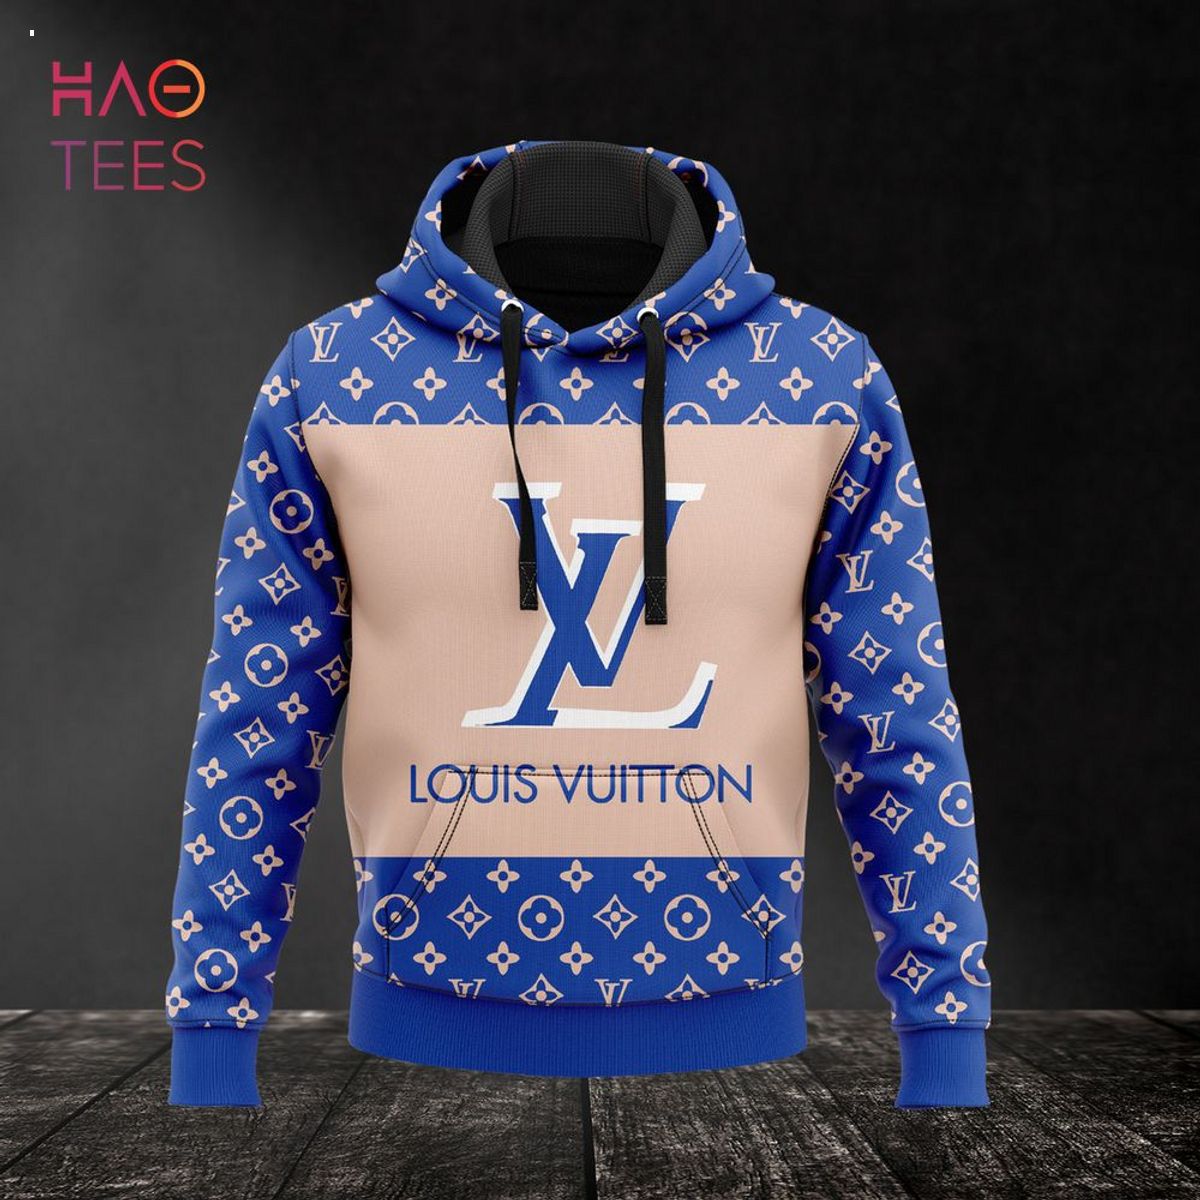 BEST] Louis Vuitton Blue Luxury Brand Hoodie Pants Limited Edition